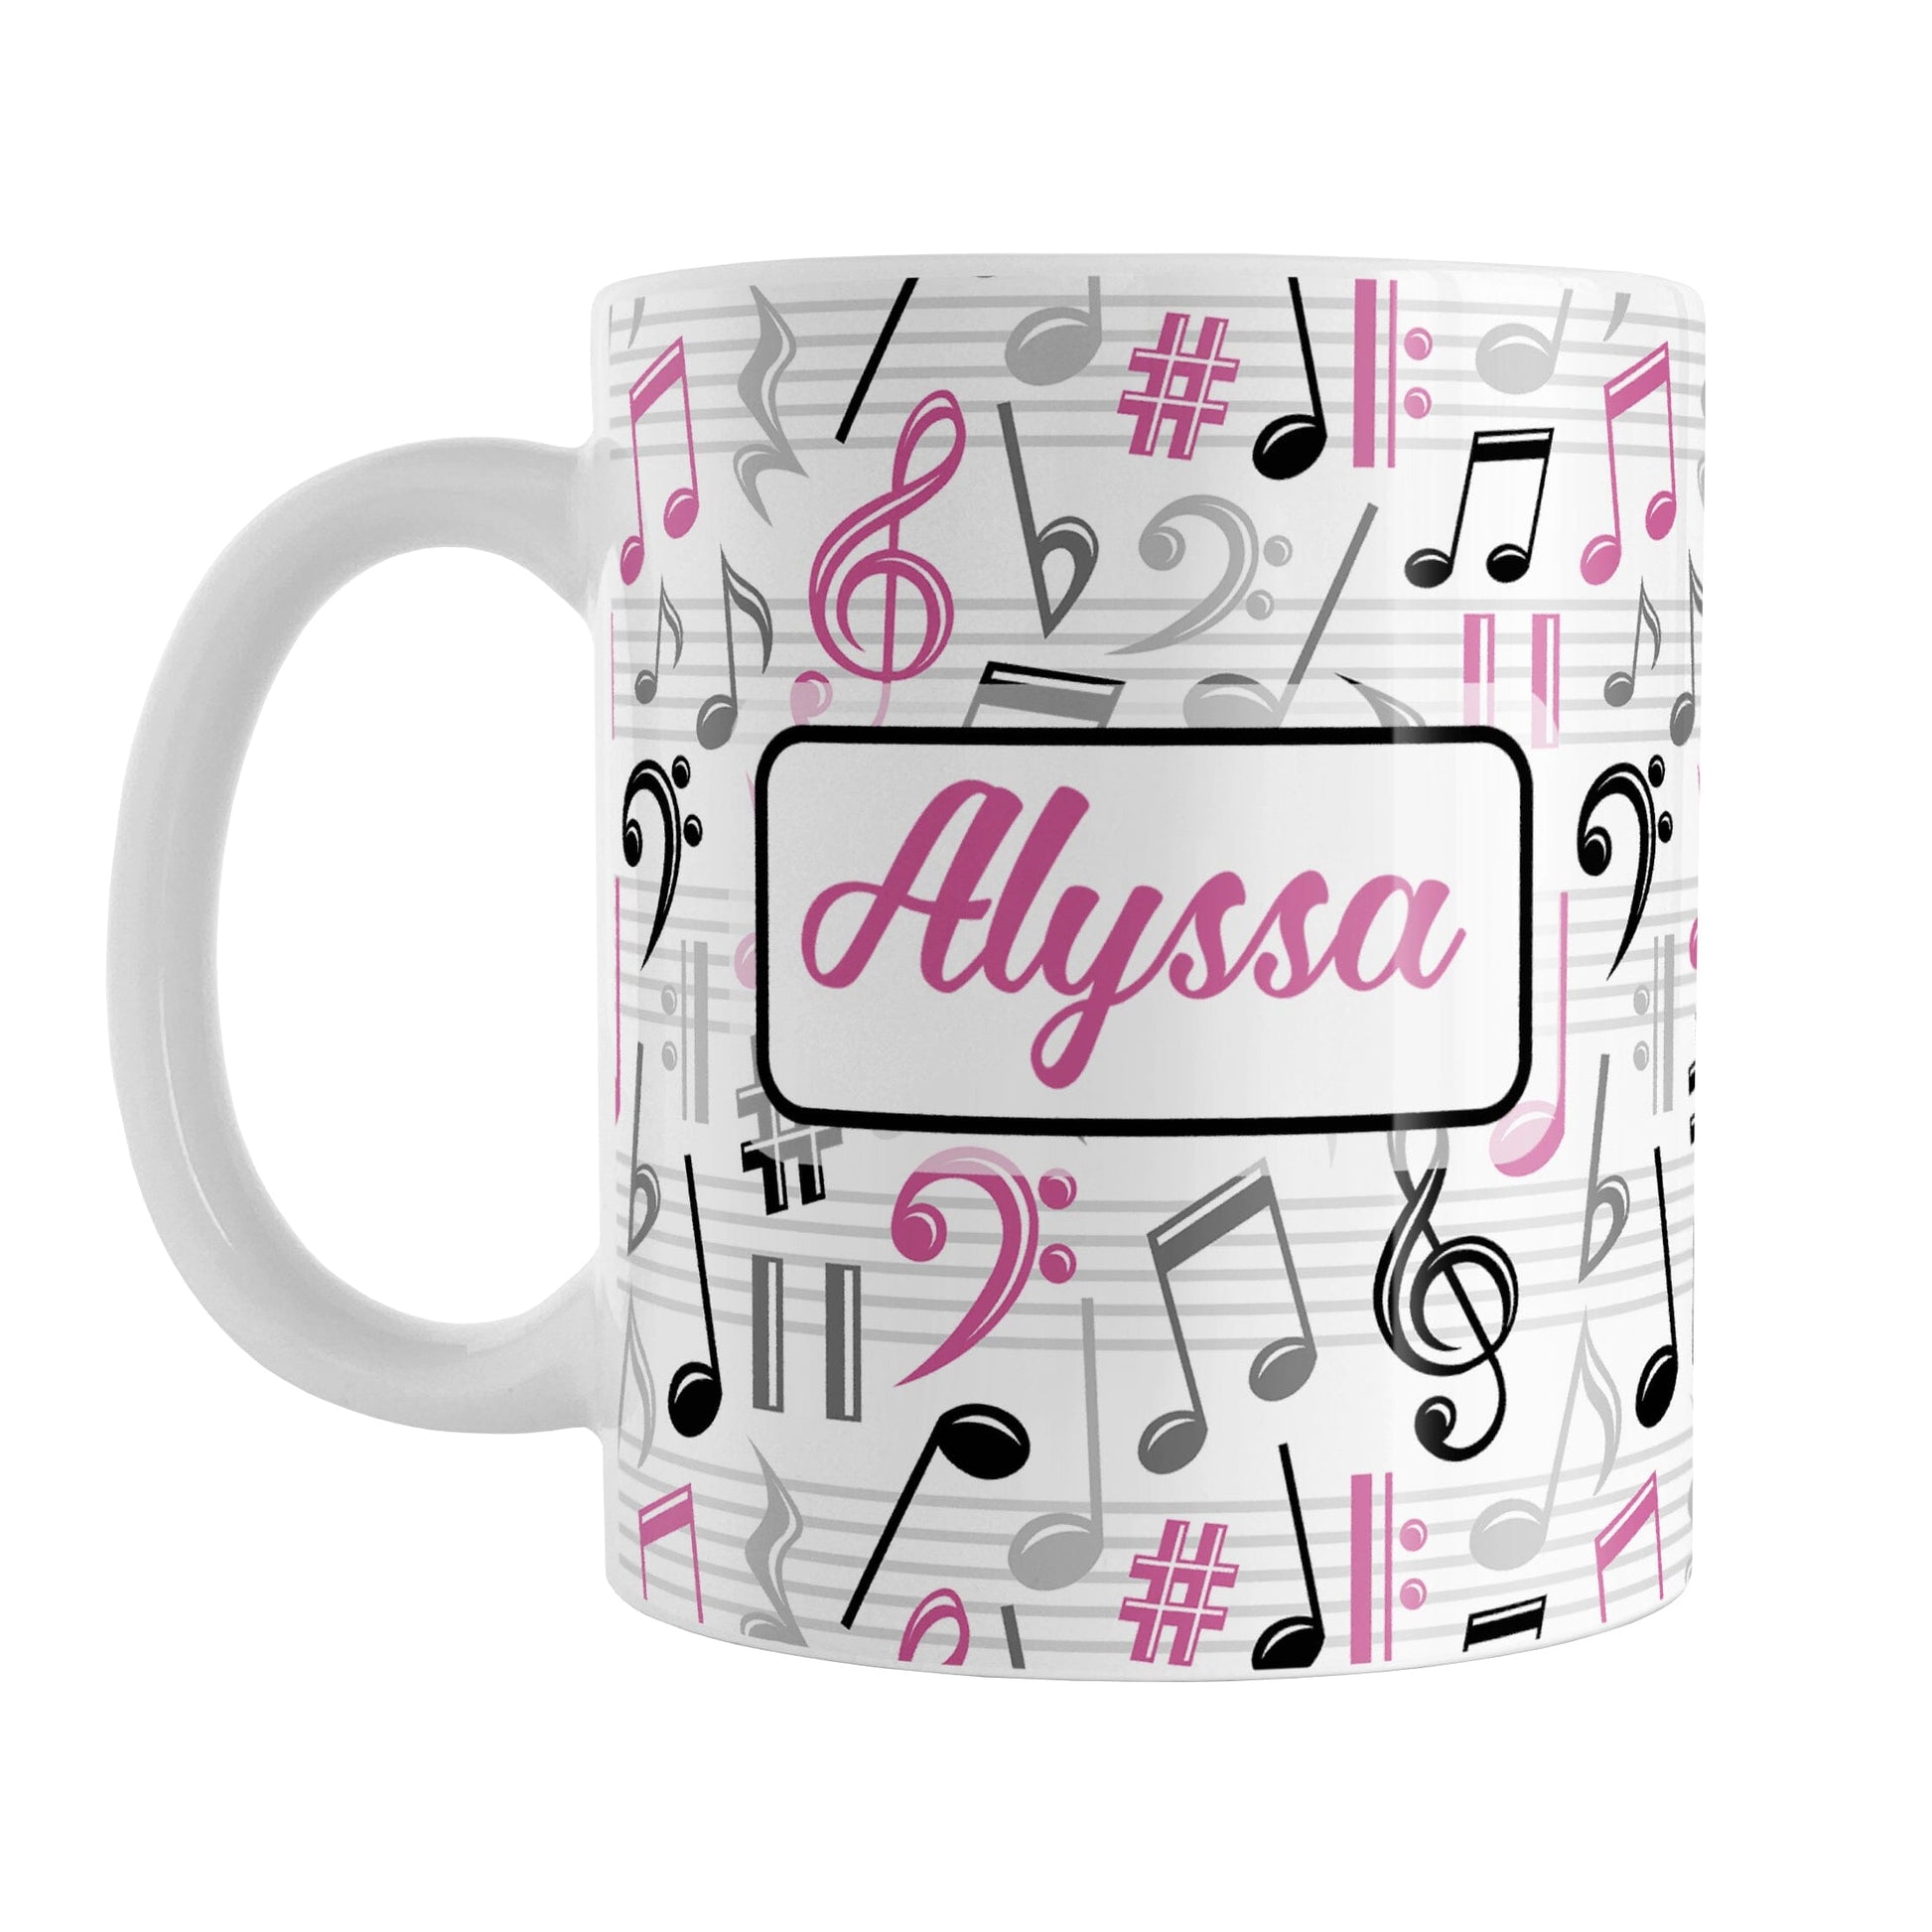 Personalized Pink Music Notes Pattern Mug (11oz) at Amy's Coffee Mugs. A ceramic coffee mug designed with music notes and symbols in pink, black, and gray in a pattern that wraps around the mug to the handle. Your personalized name is custom printed in a pink script font on white over the music pattern design on both sides of the mug. 